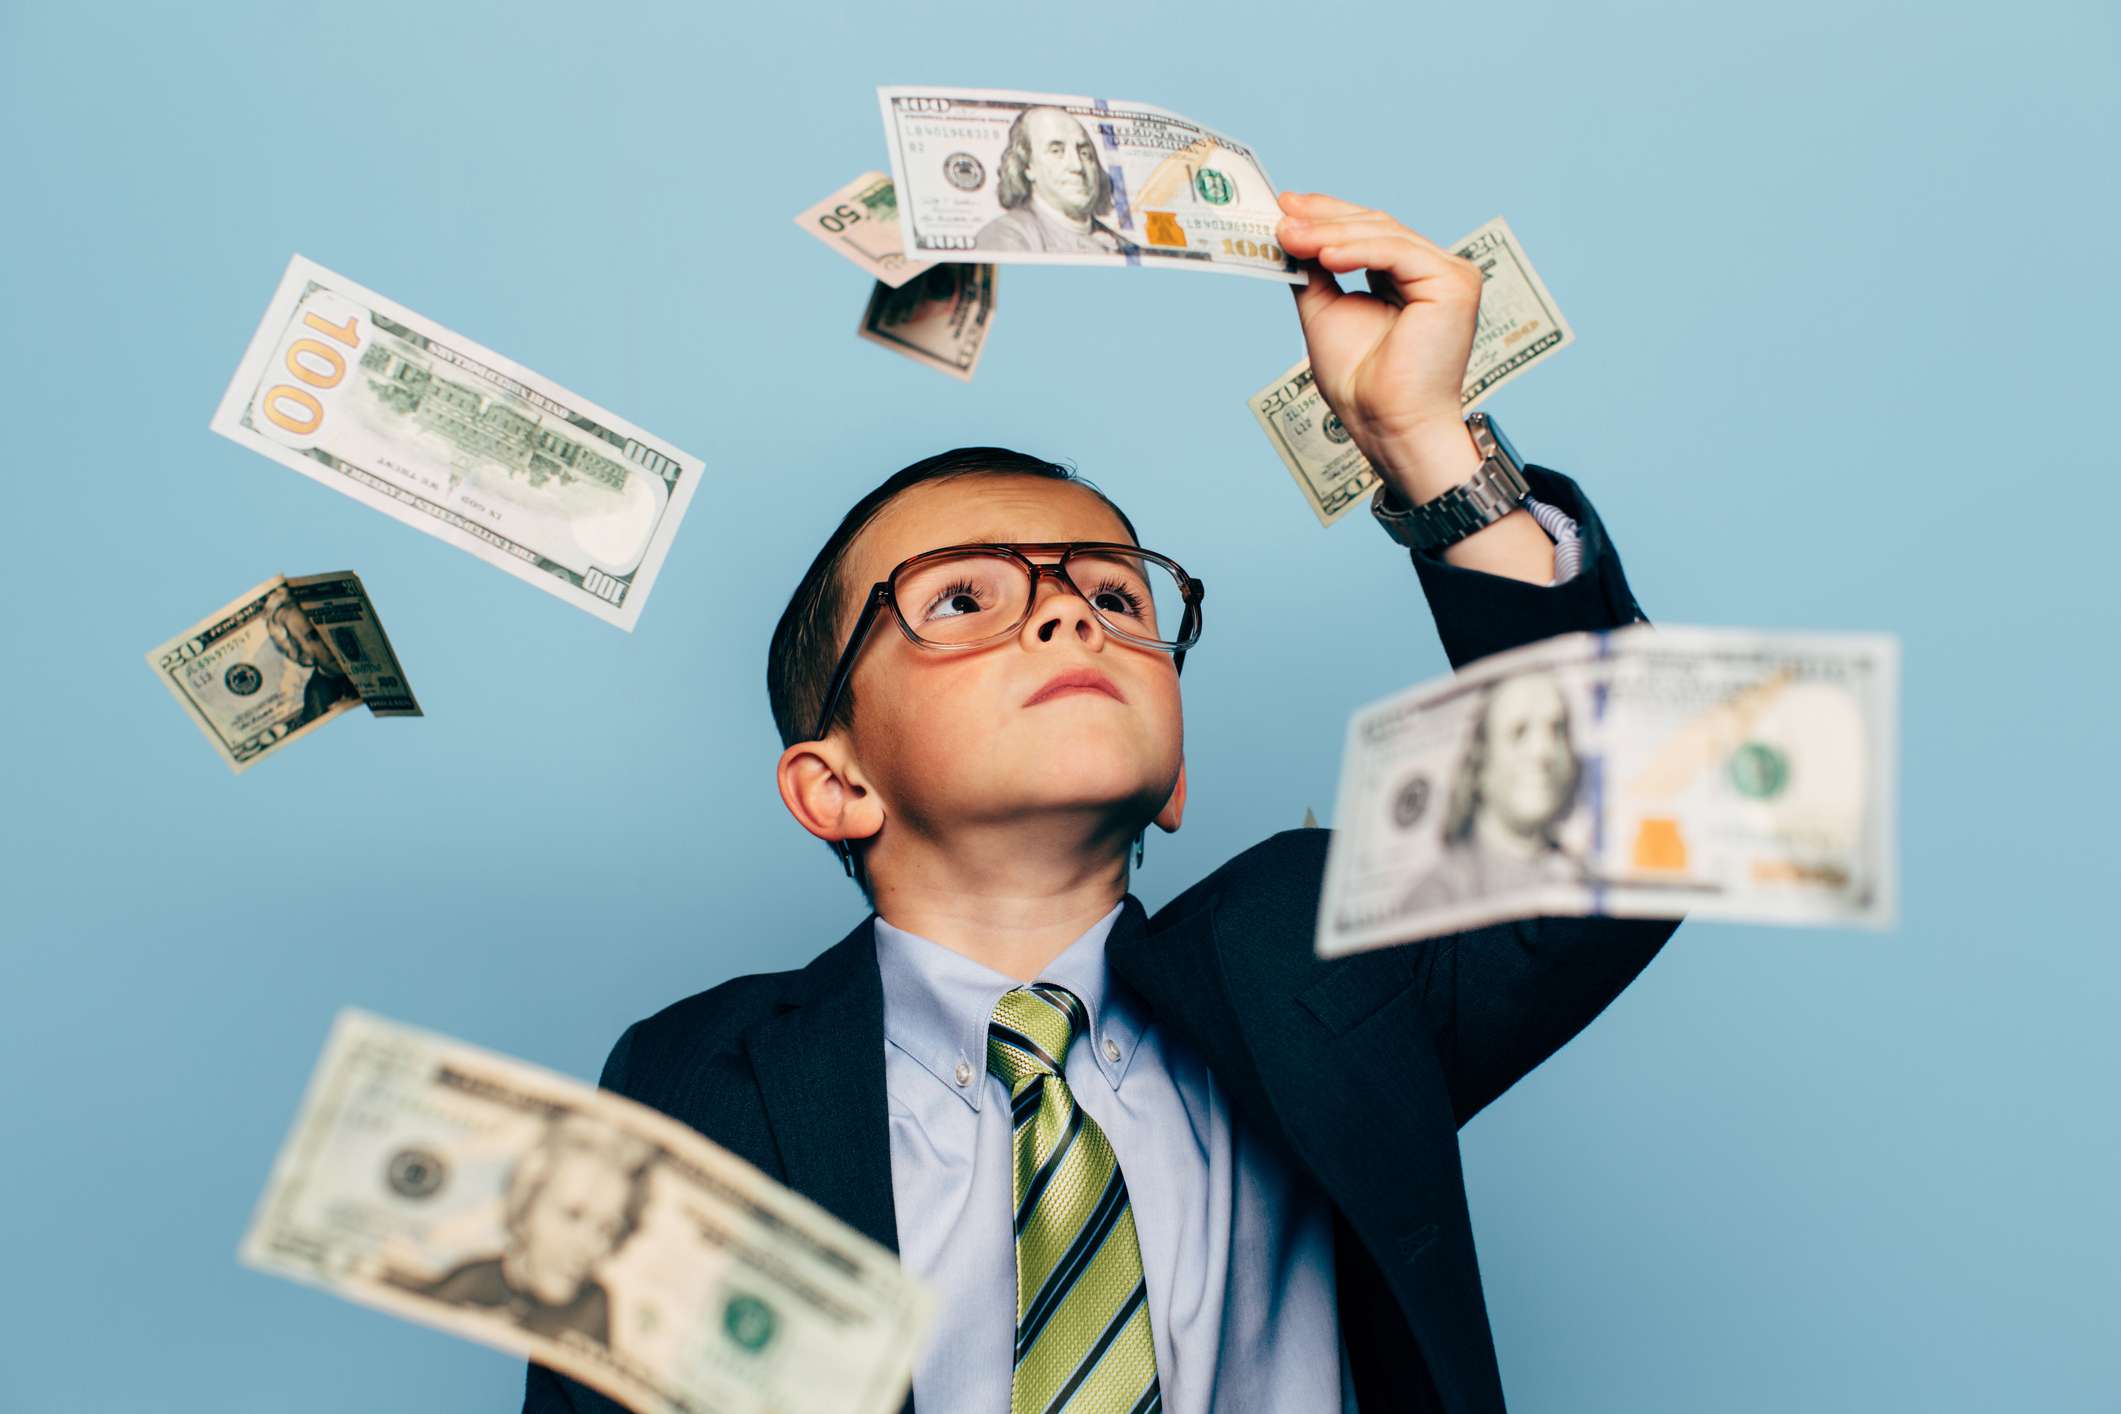 A young boy accountant wearing glasses and suit watches U.S. currency while more falls from above. He is looking closely at Ben Franklin.